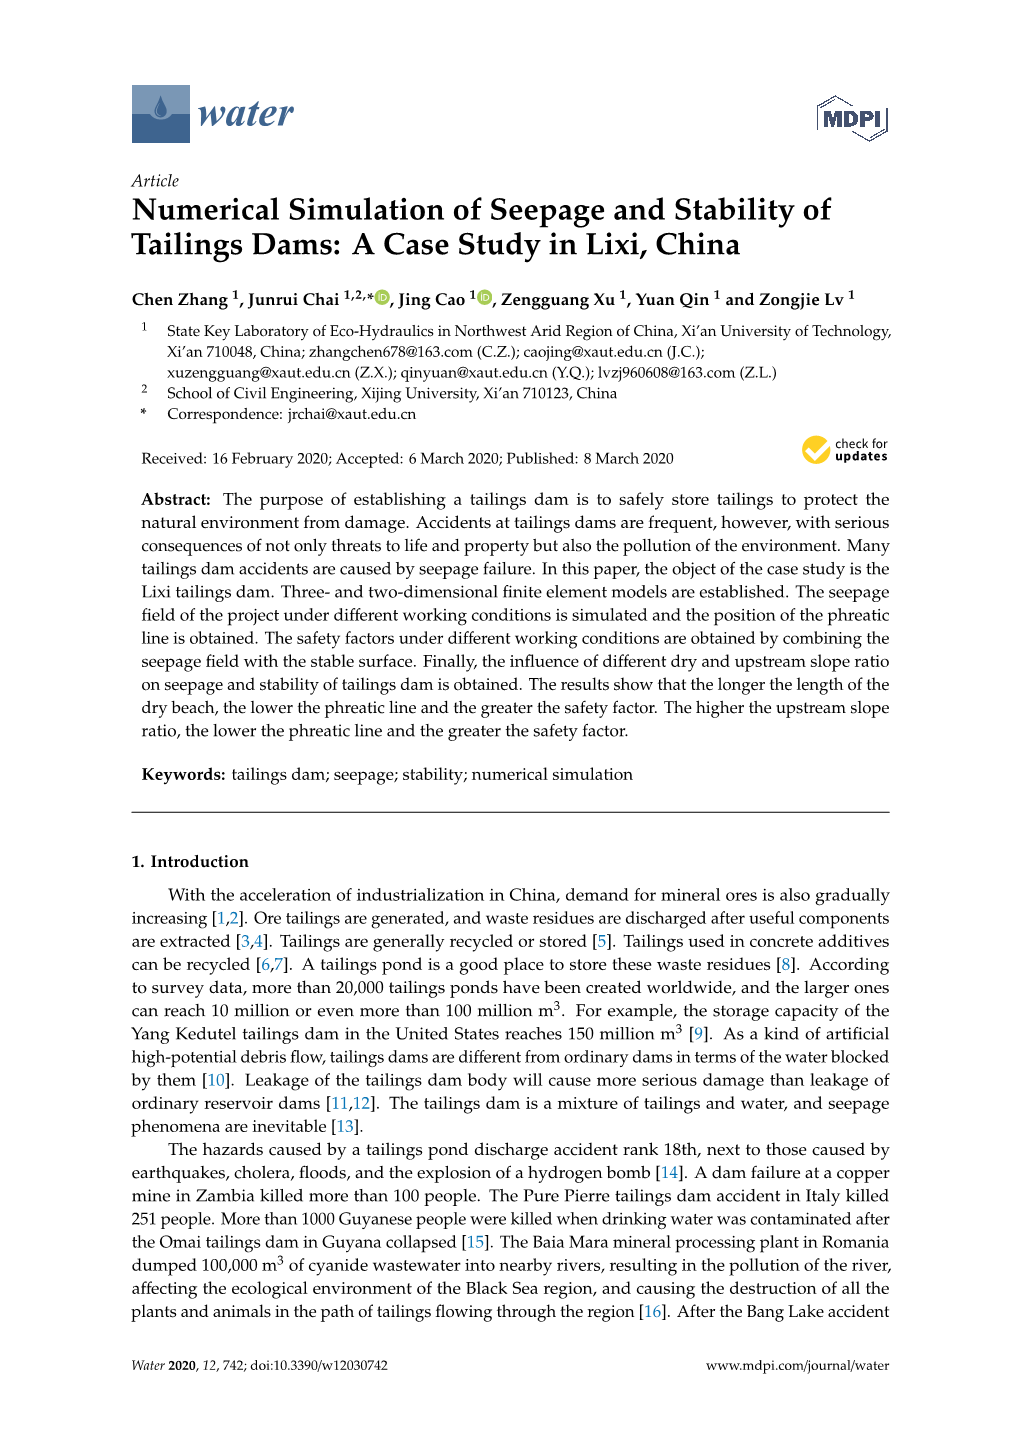 Numerical Simulation of Seepage and Stability of Tailings Dams: a Case Study in Lixi, China